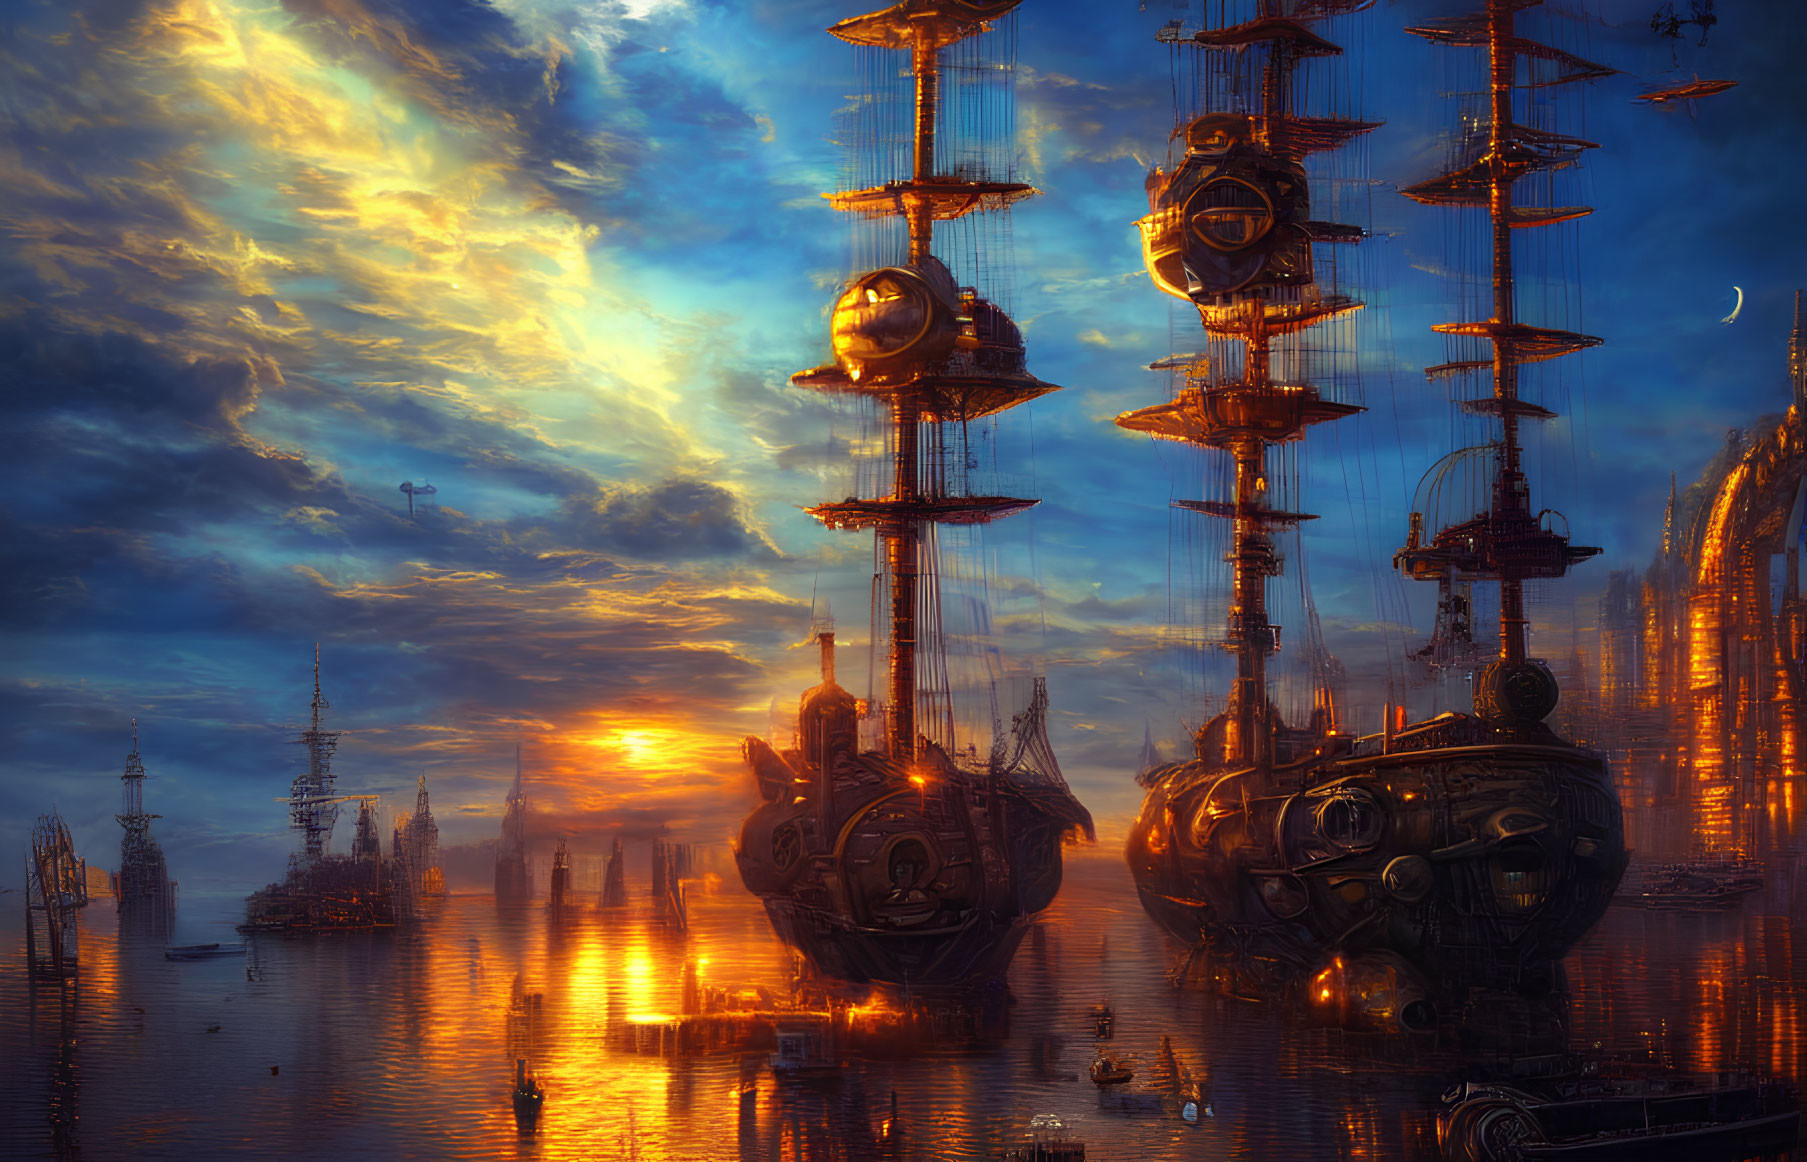 Fantasy sunset harbor with towering ships and intricate masts against dramatic sky